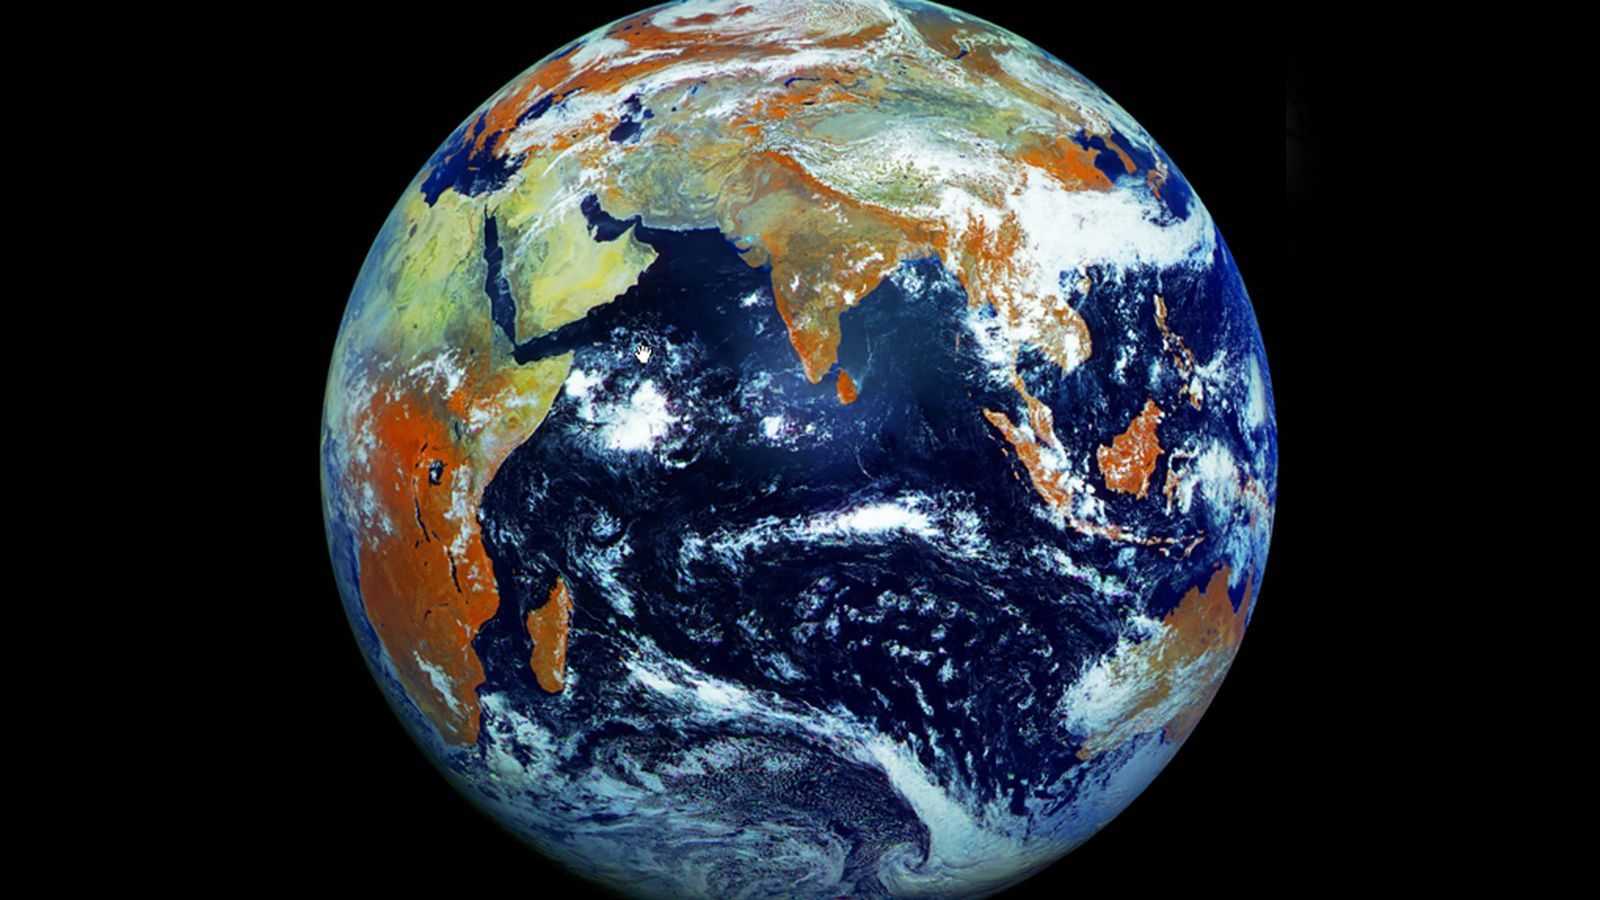 Russian Satellite's 121 Megapixel Image Of Earth Is Most Detailed Yet